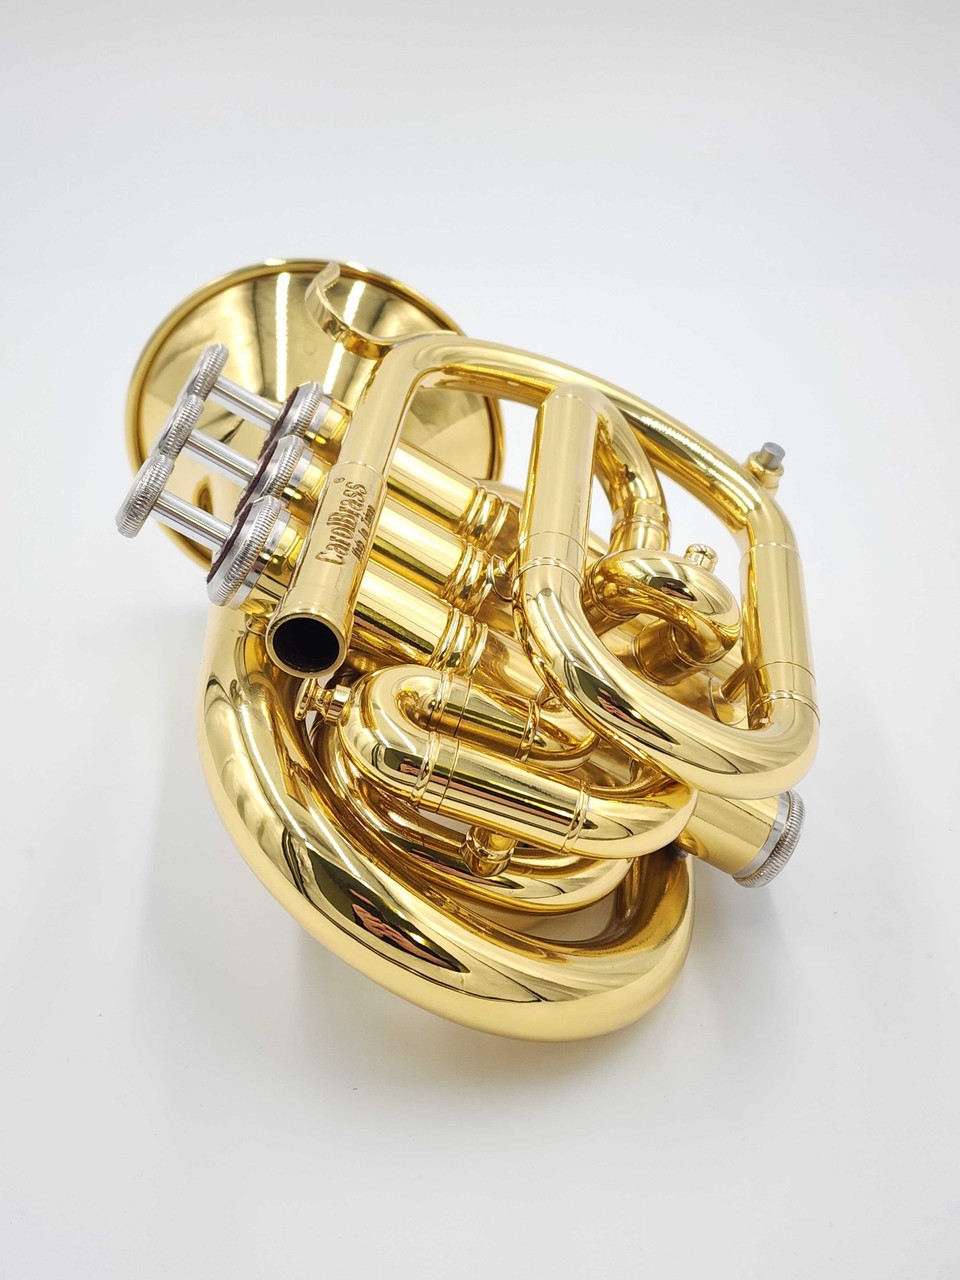 Just in Stock! The Adorable Carolbrass Mini C Pocket Trumpet in